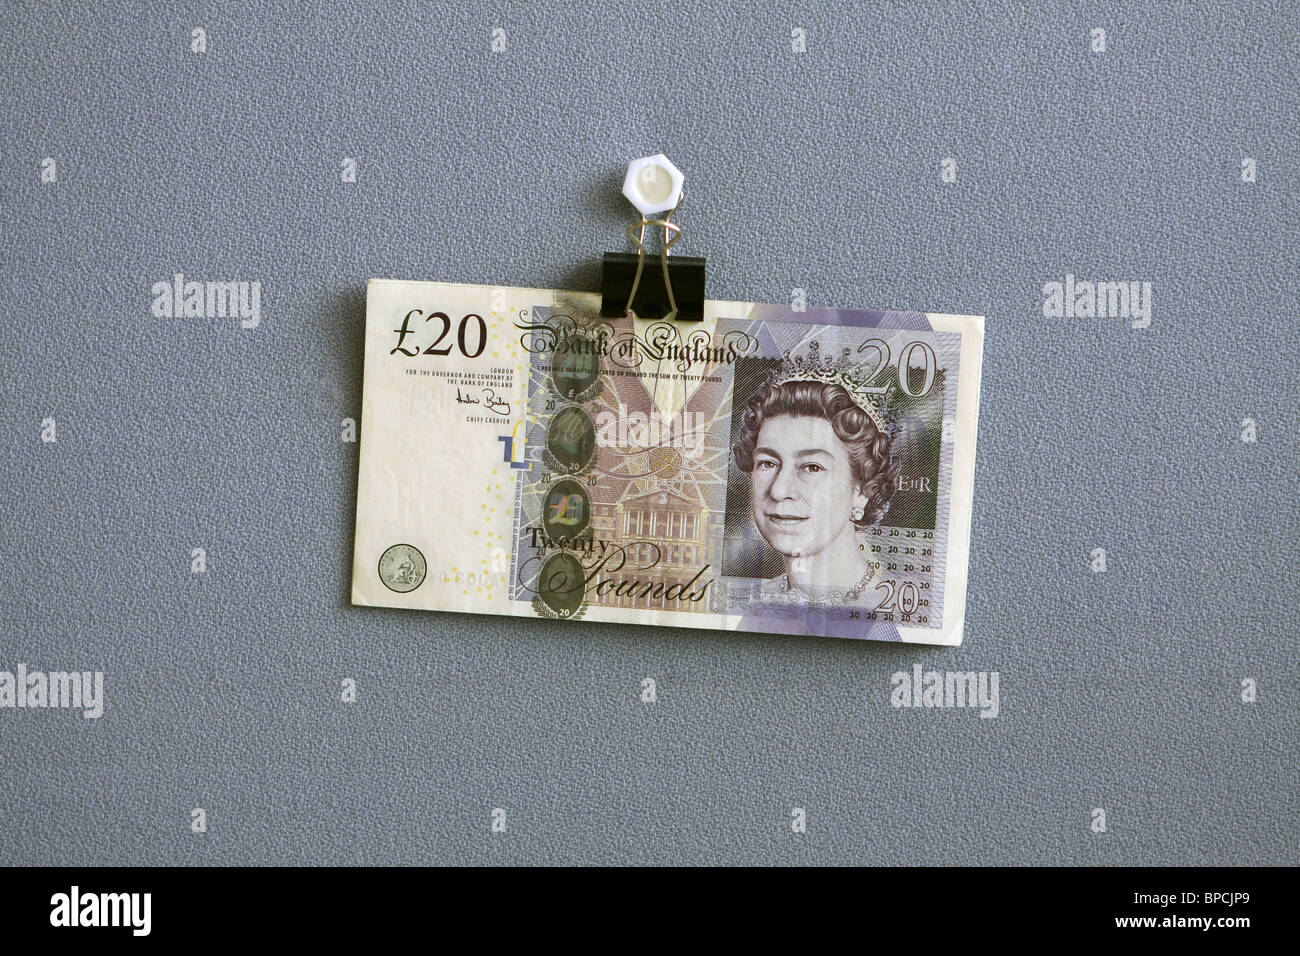 £20 note hanging from a bulldog clip against a blue cloth background Stock Photo